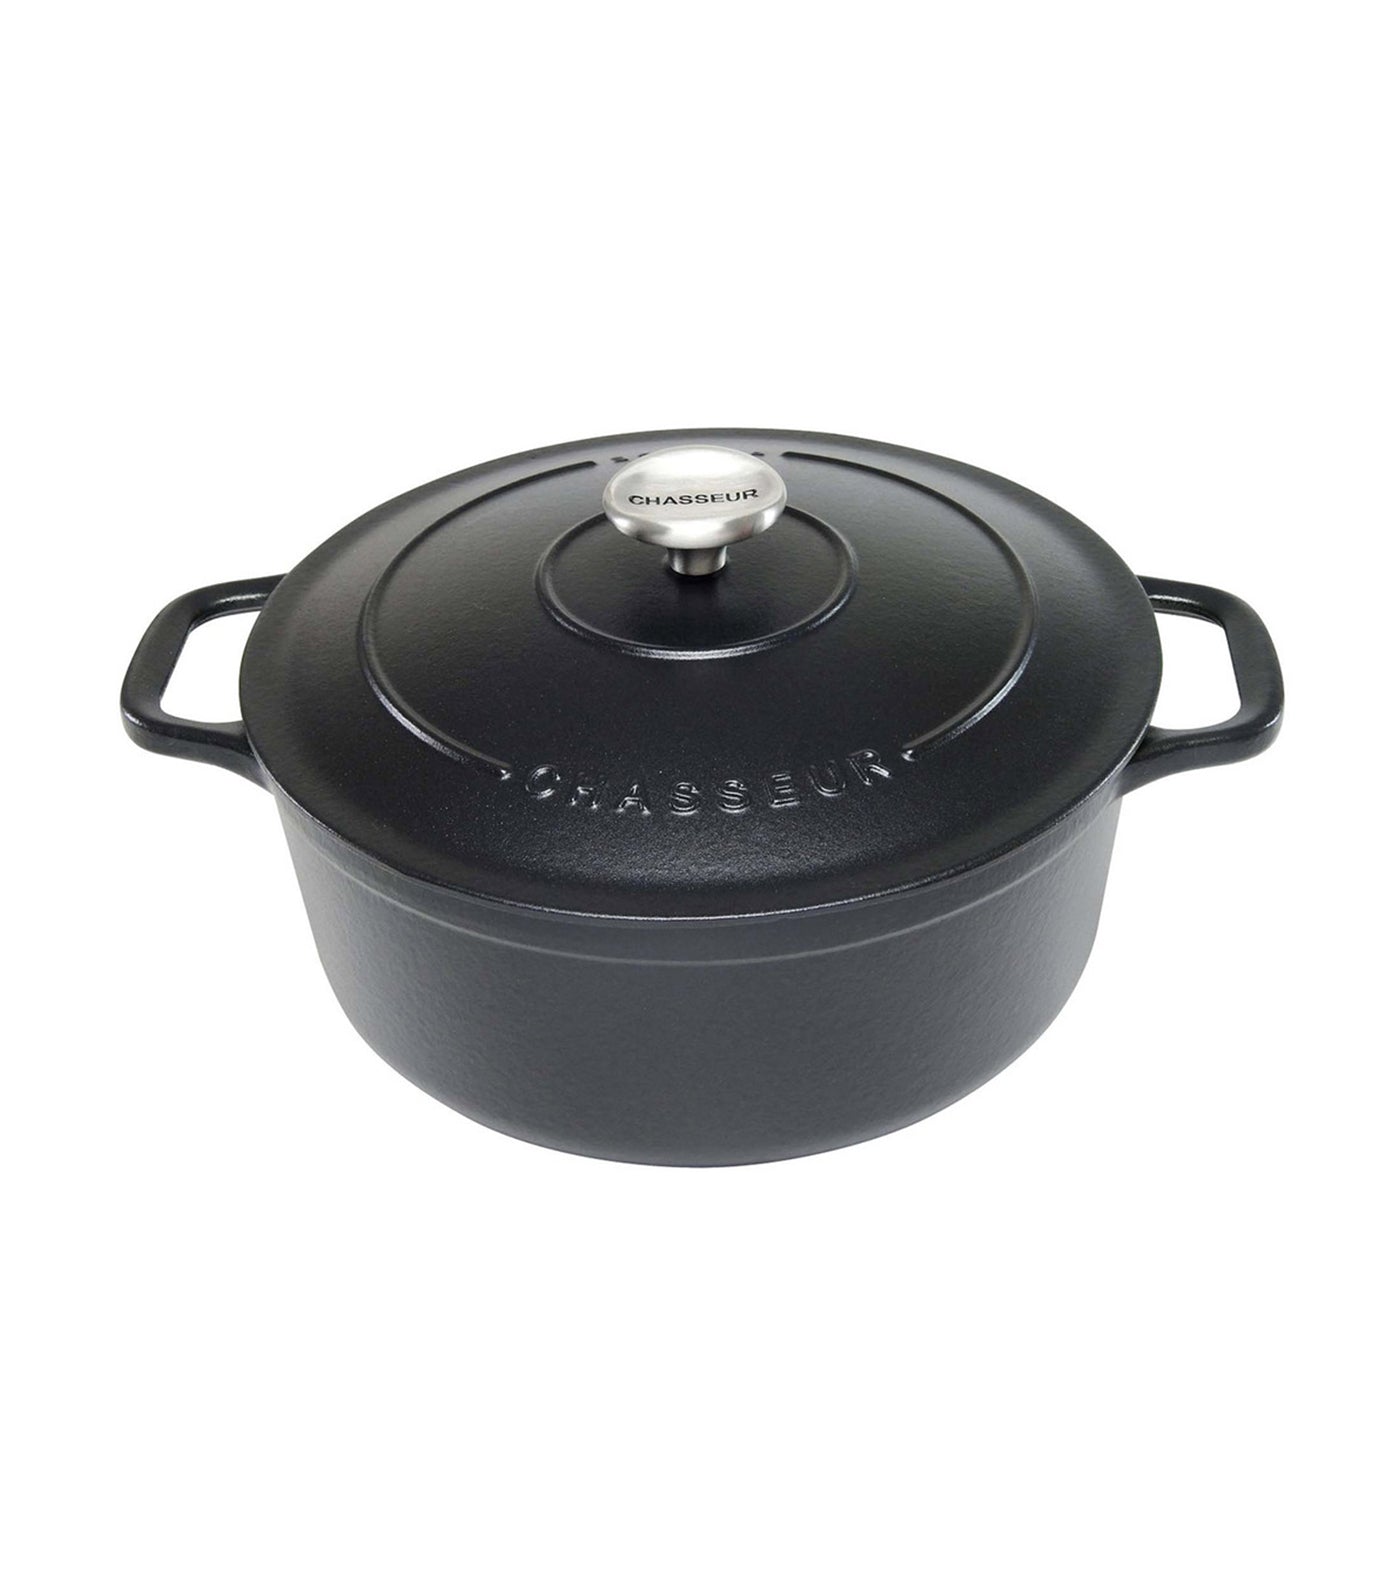 Chasseur Round French Oven - Matte Black